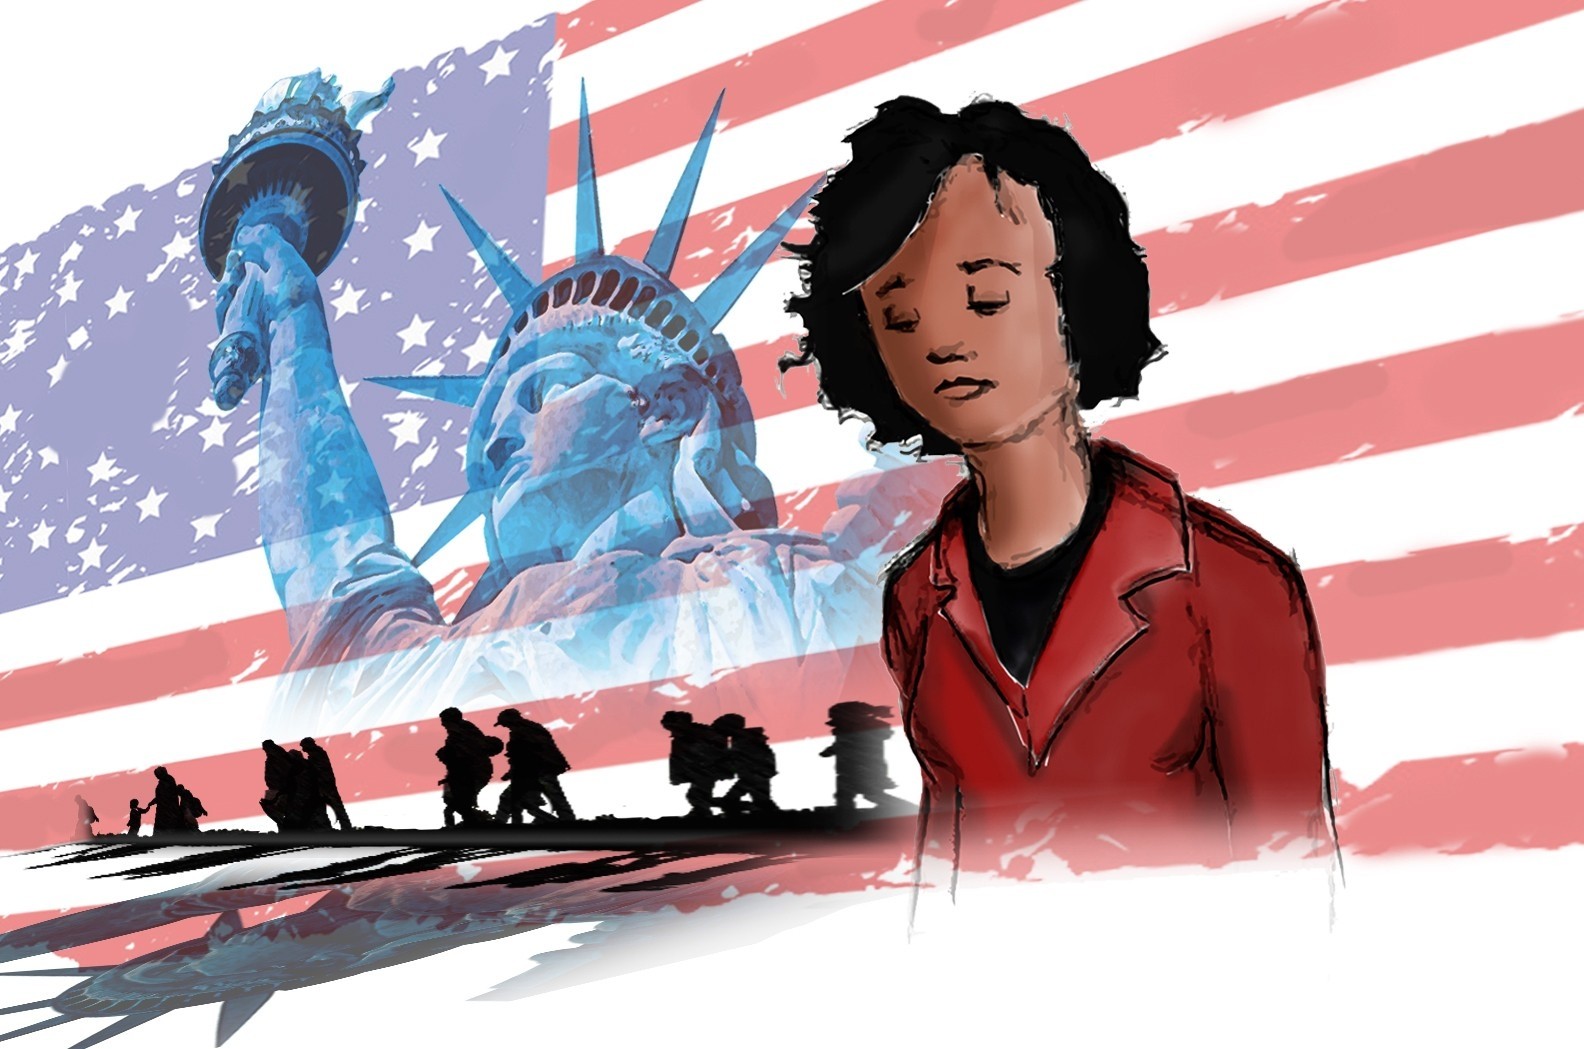 Drawing of a woman with medium-brown skin tone in front of an American flag, the Statue of Liberty, and the silhouettes of refugees